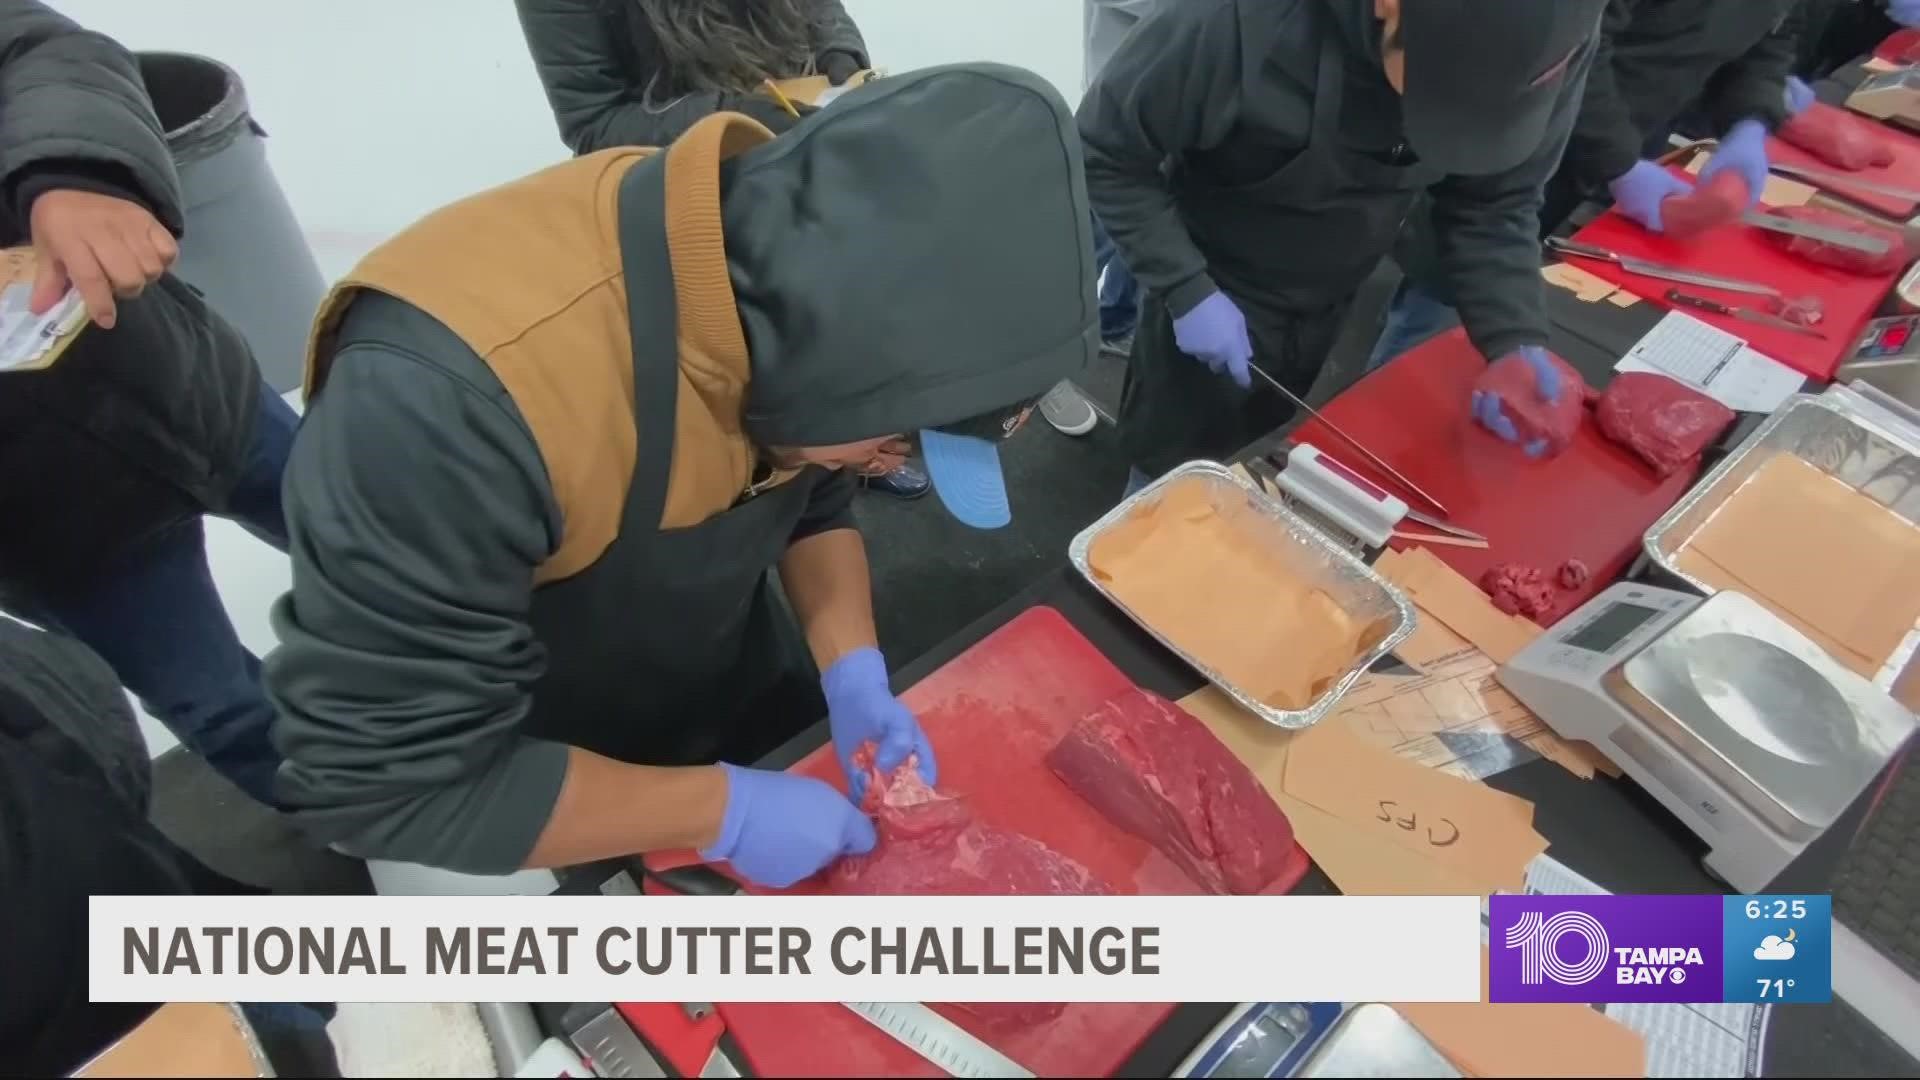 A total of 25 professional meat cutters from across the region competed Wednesday in hopes of moving on to the semi-finals.